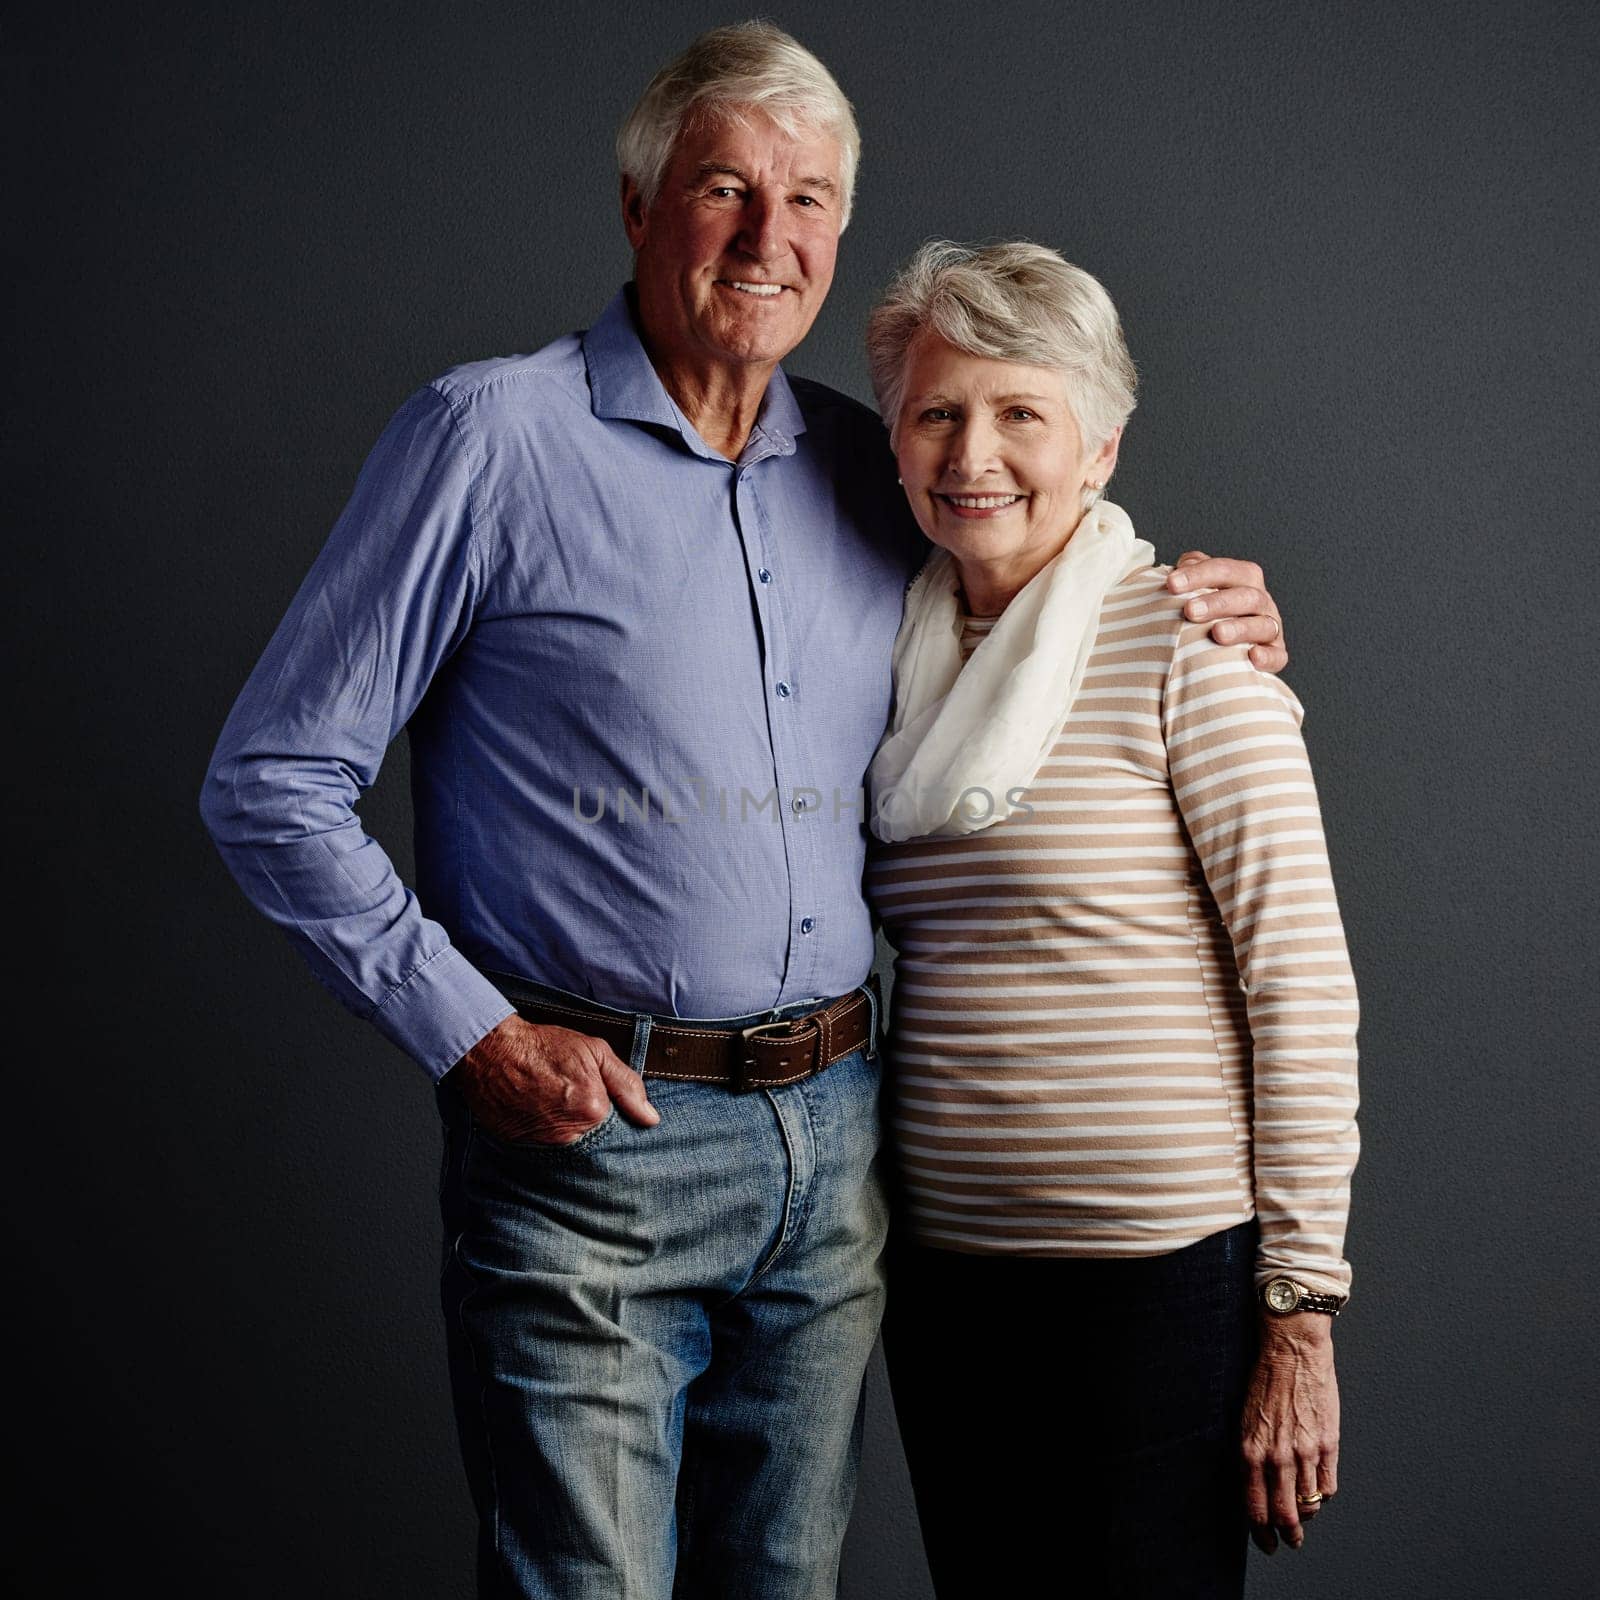 The perfect pair. Studio portrait of an affectionate senior couple posing against a grey background